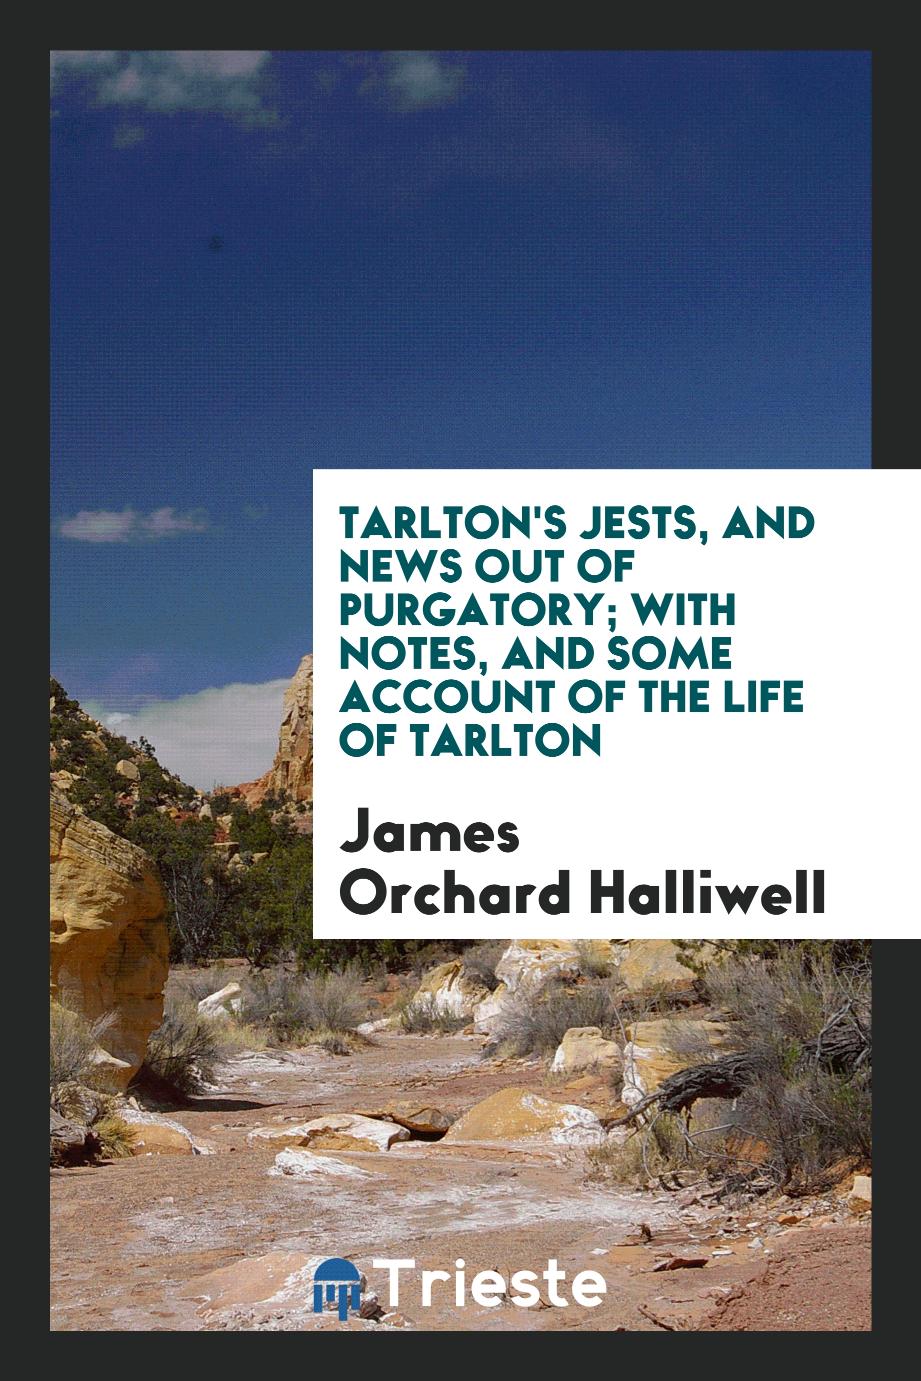 Tarlton's Jests, and News out of Purgatory; With Notes, and Some Account of the Life of Tarlton